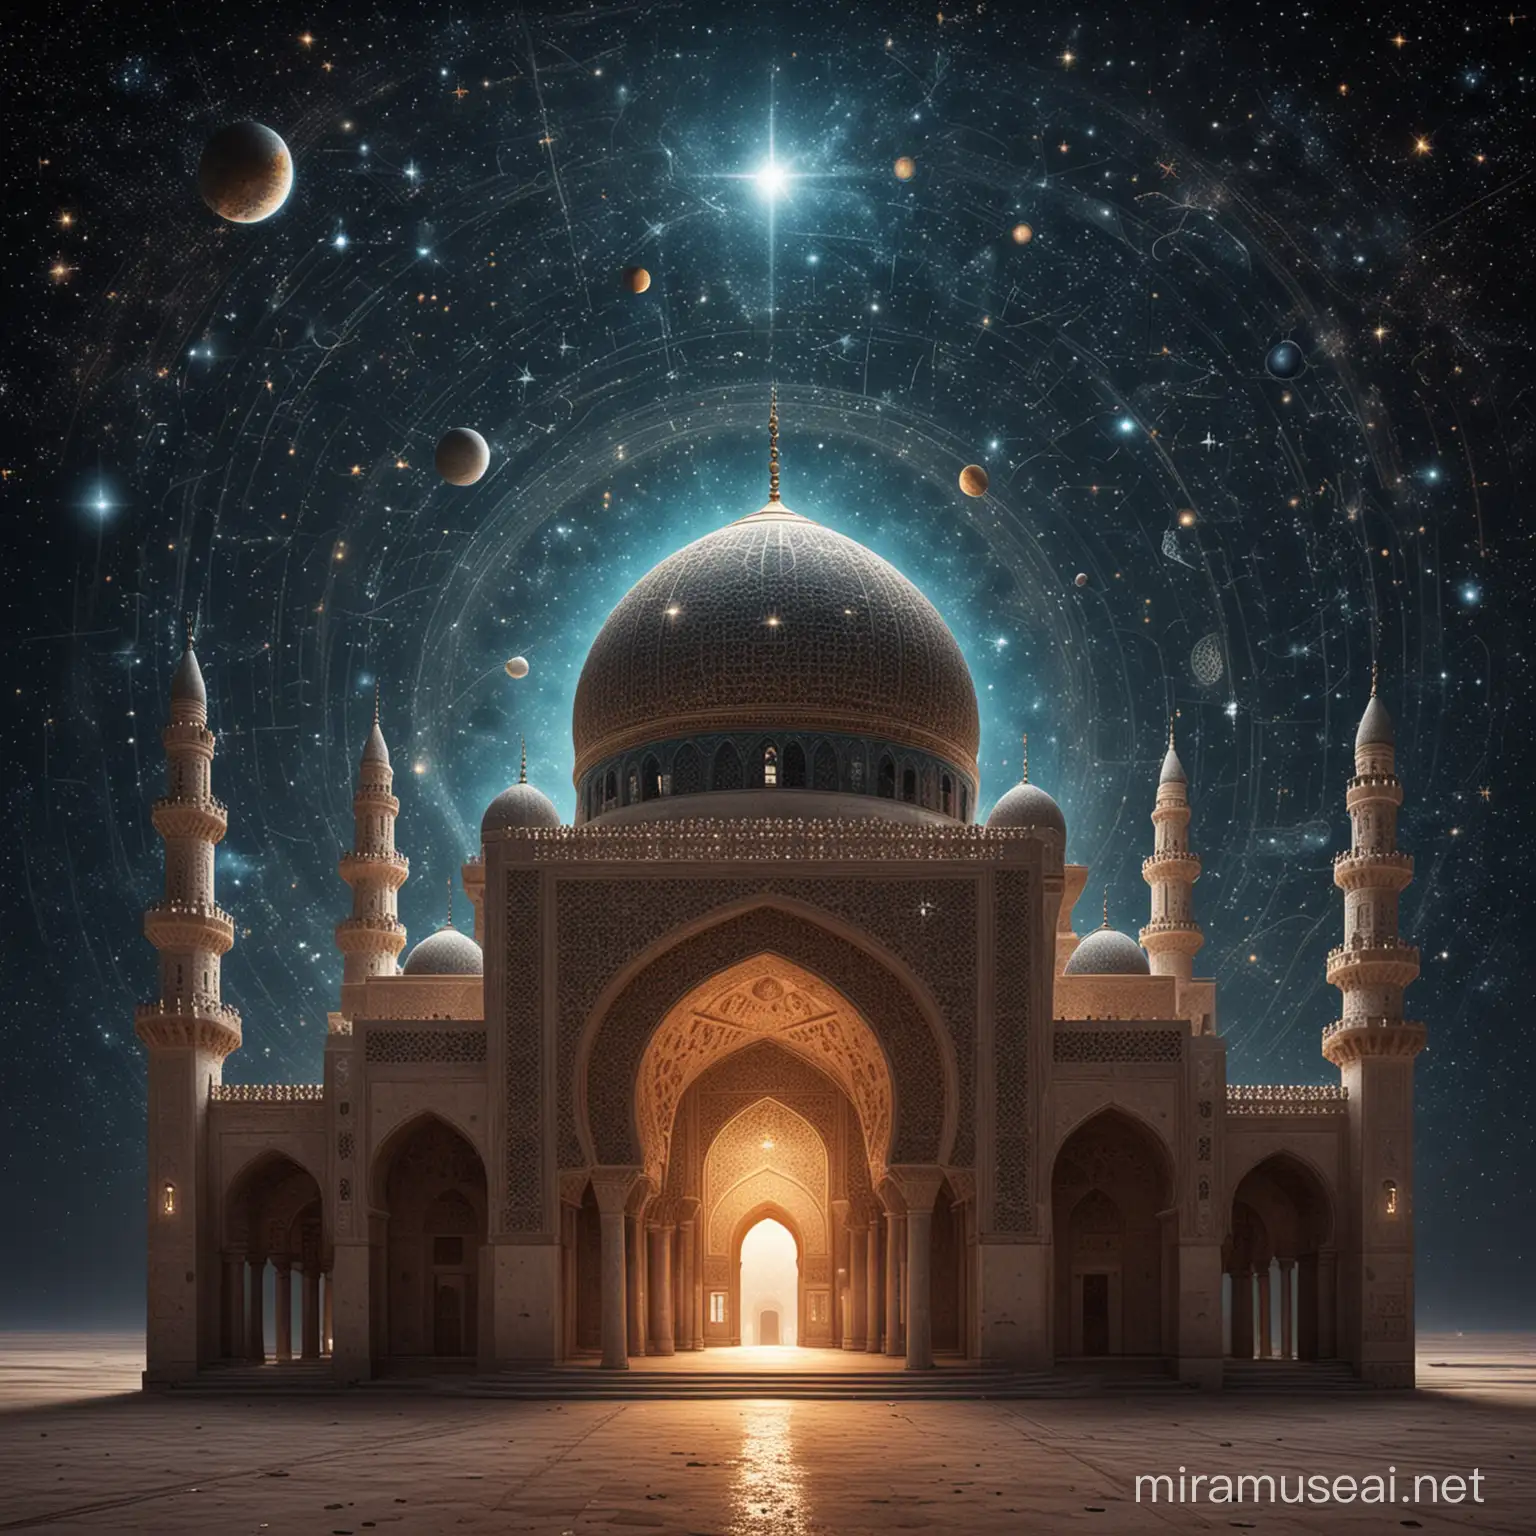 Abstract image of arabic mosque in the form of a starry sky or space, consisting of points, lines, and shapes in the form of planets, stars and the universe